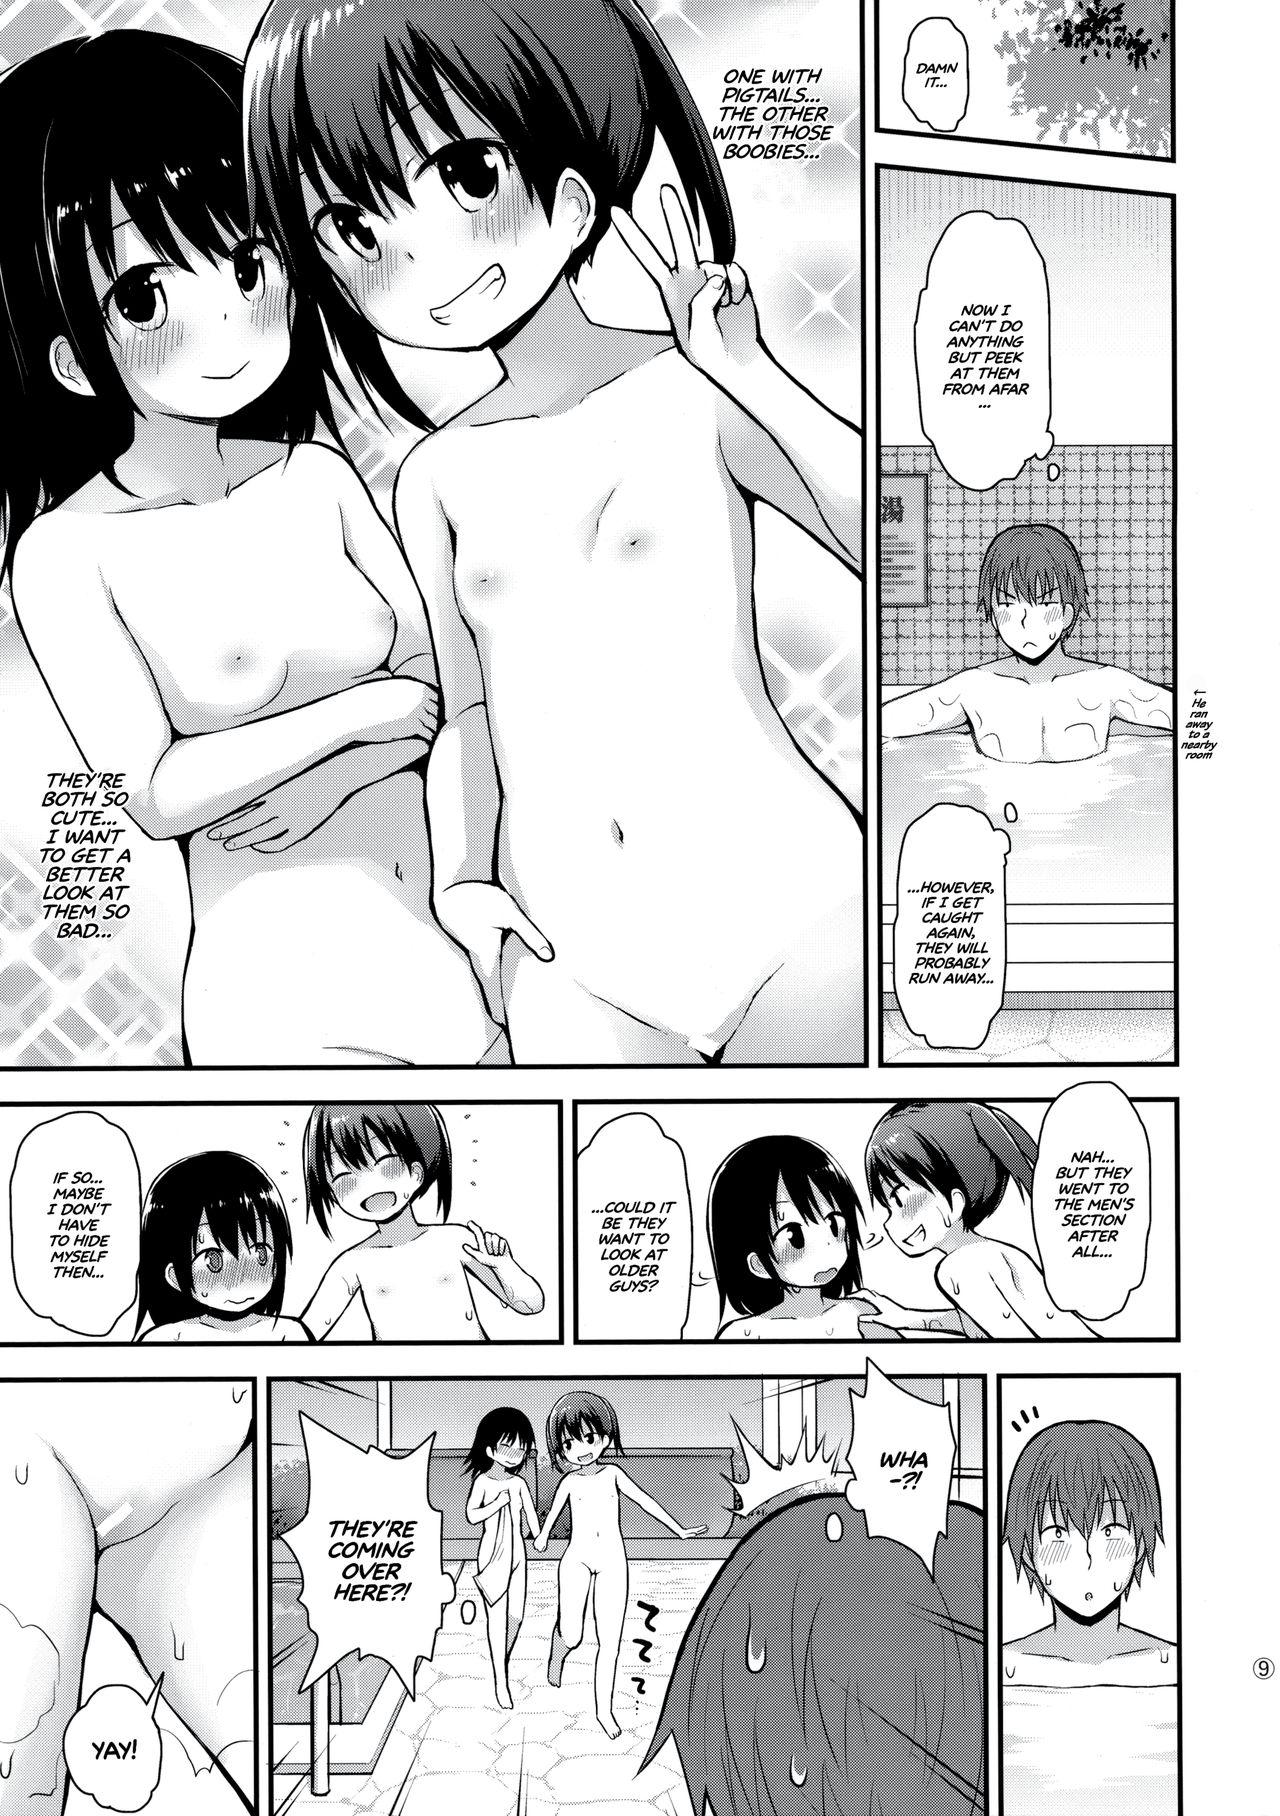 Follada Onnanoko datte Otokoyu ni Hairitai | They may just be little girls, but they still want to enter the men's bath! - Original Blowing - Page 8